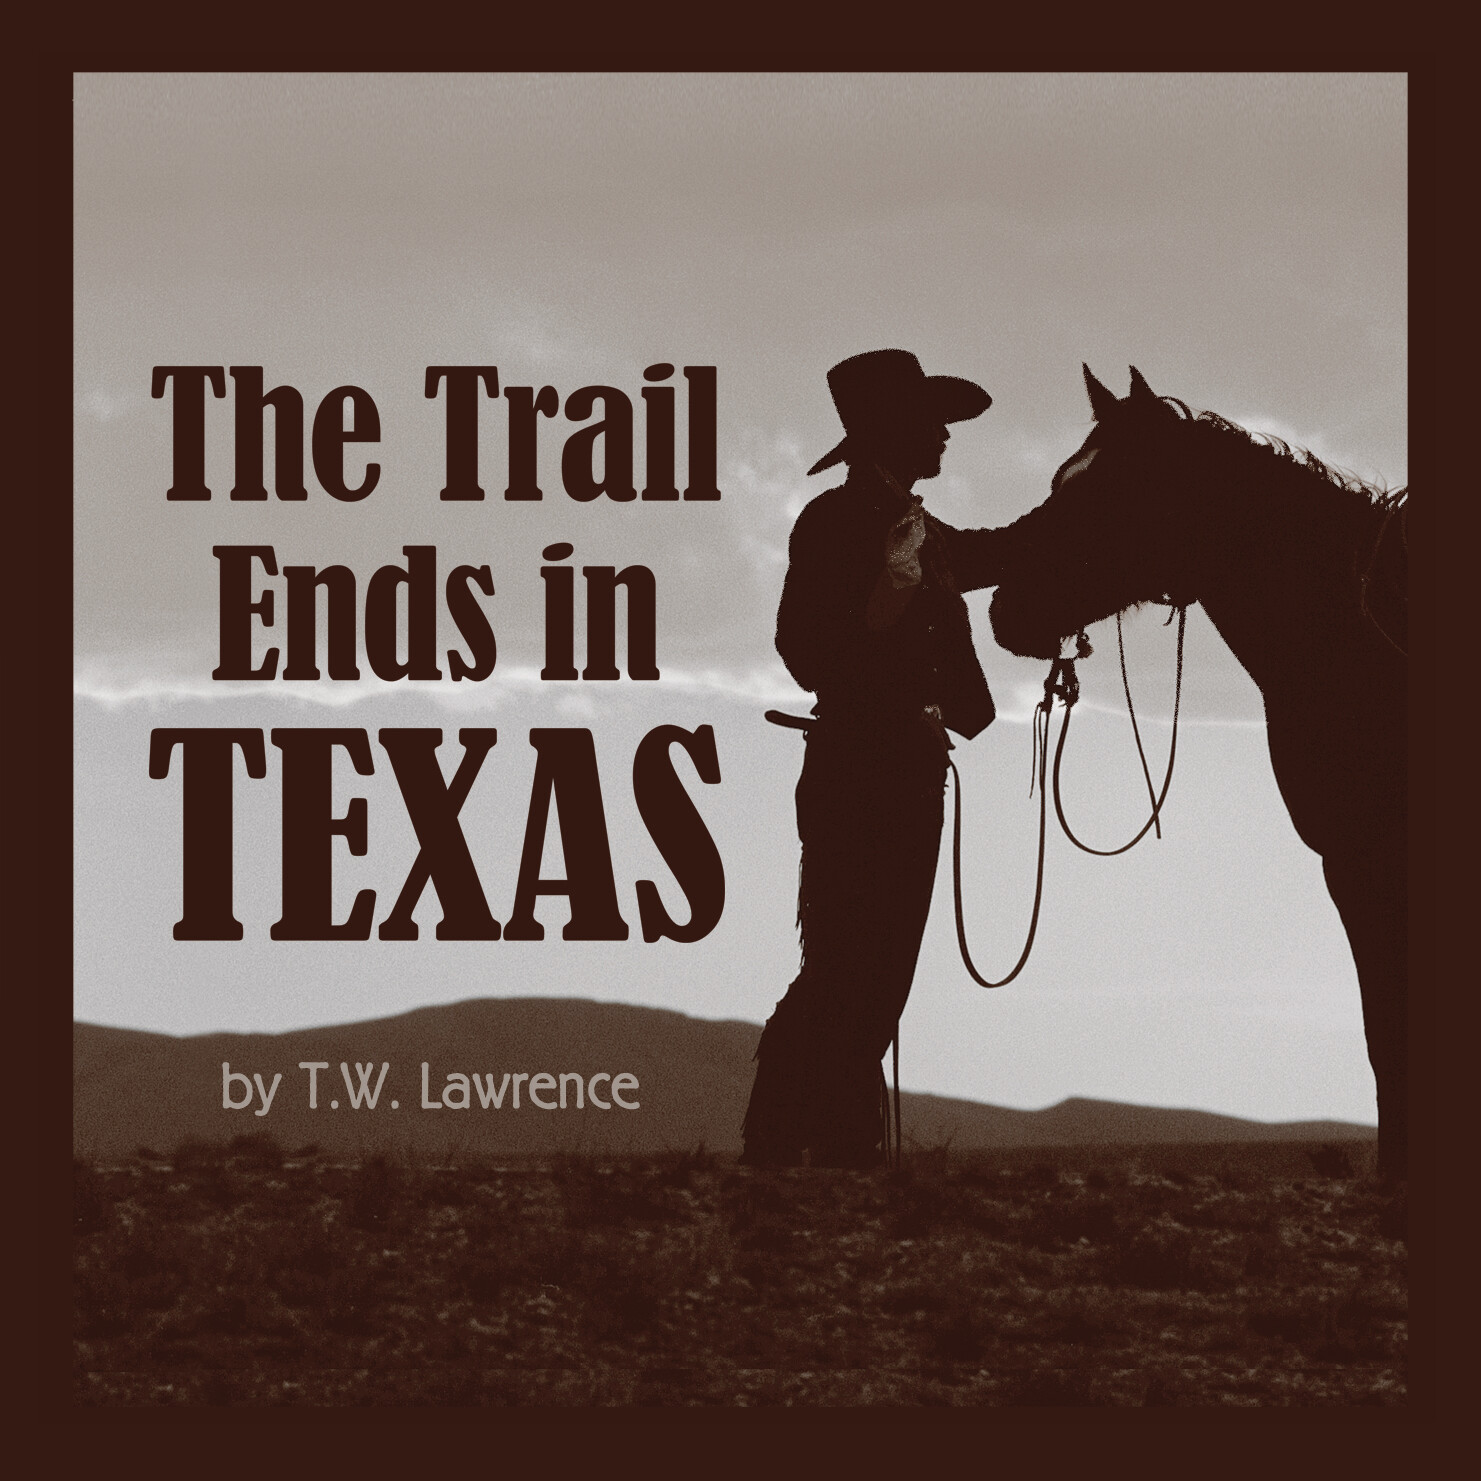 100 The Trail Ends in Texas (paperback)